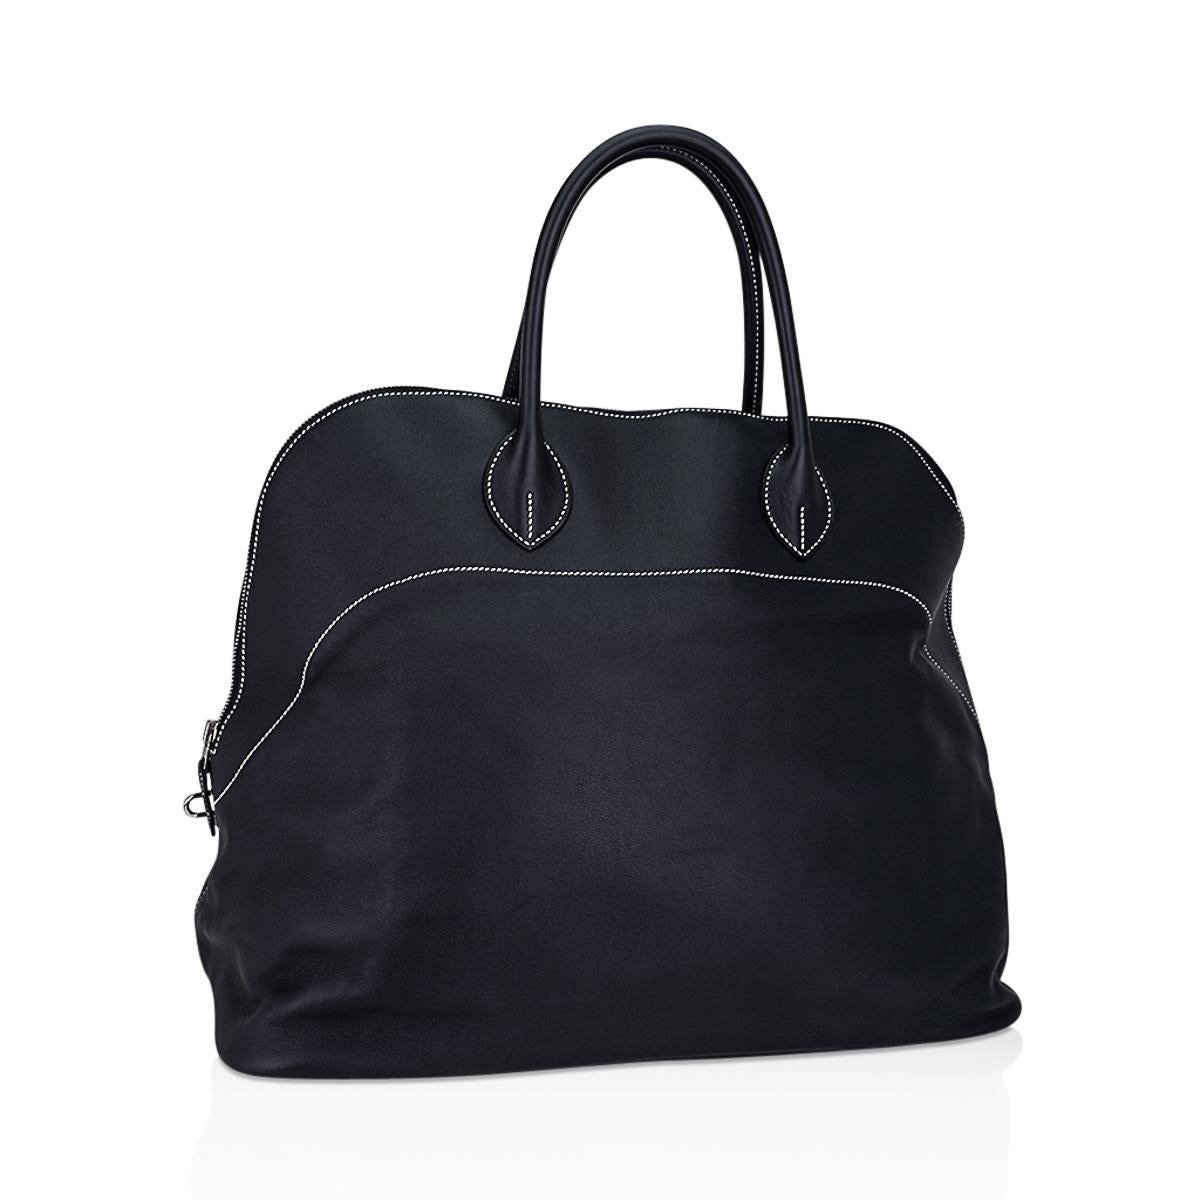 Mightychic offers a limited edition rare Hermes Bolide Relax (Mou) 45 bag featured in Black.
Lightweight beautiful Sikkim leather.
Fresh Palladium hardware.
Versatile from work to a travel featured in the softest leather with white